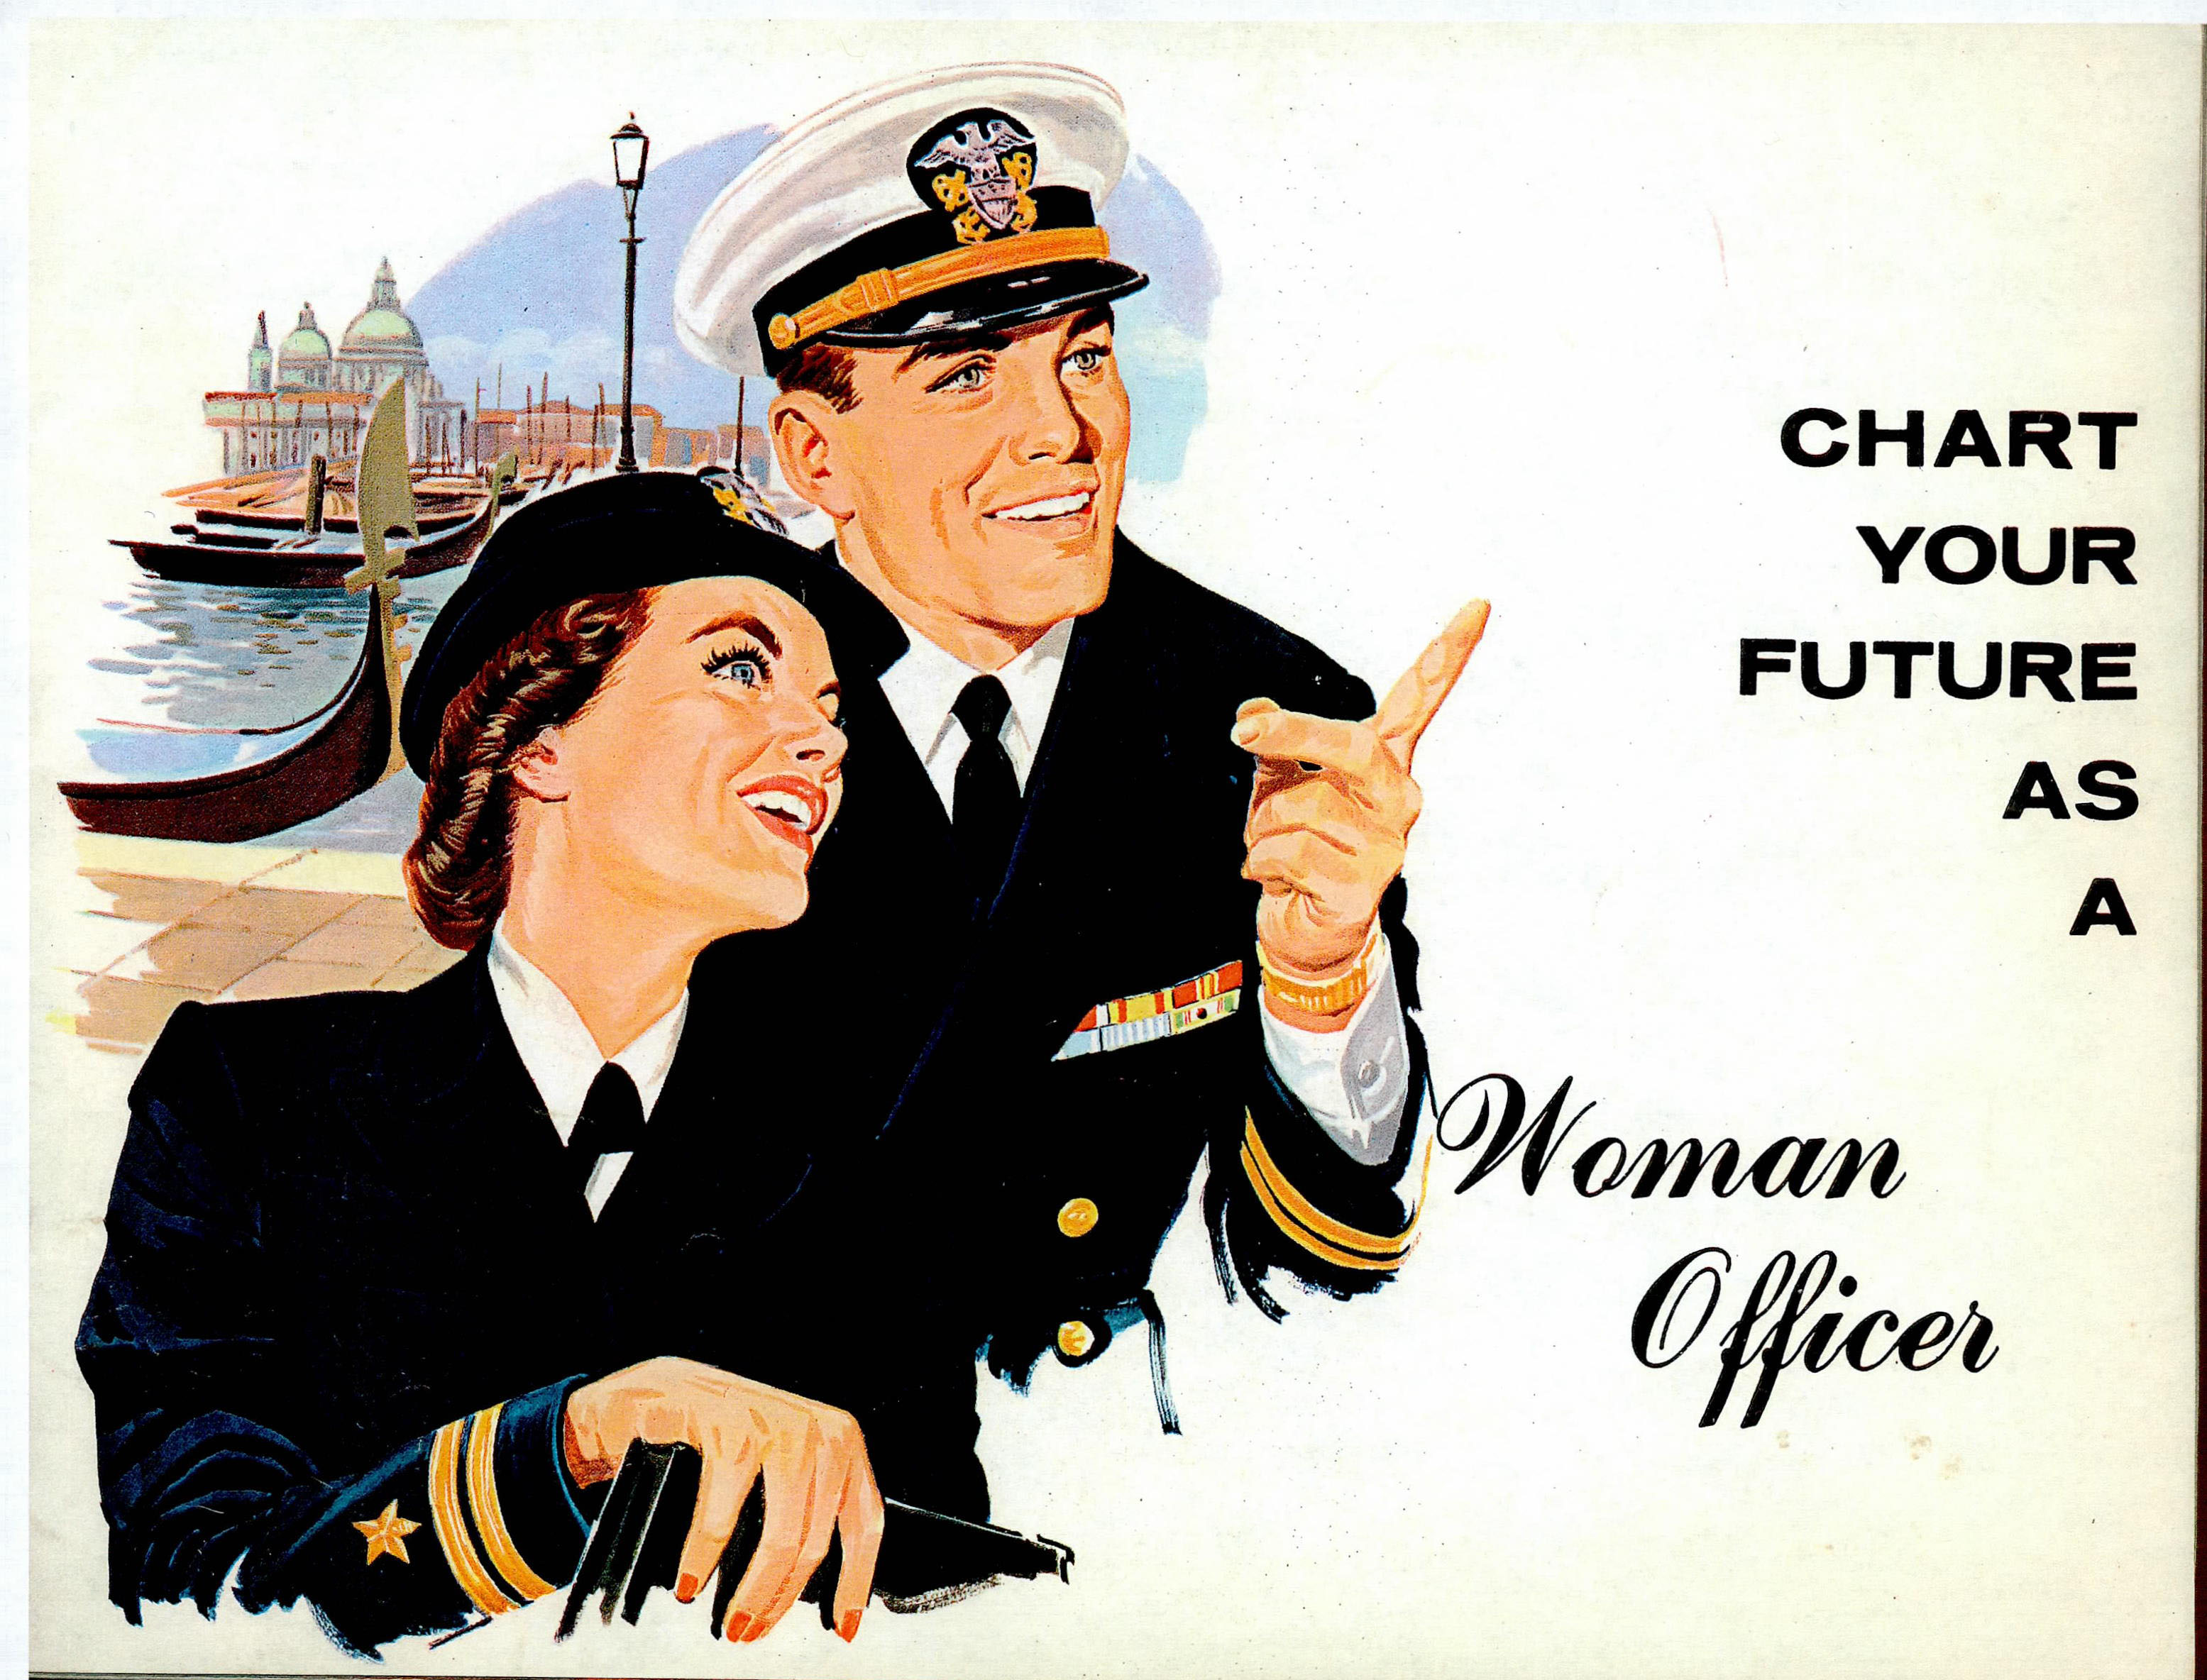 Chart Your Future As A Woman Officer